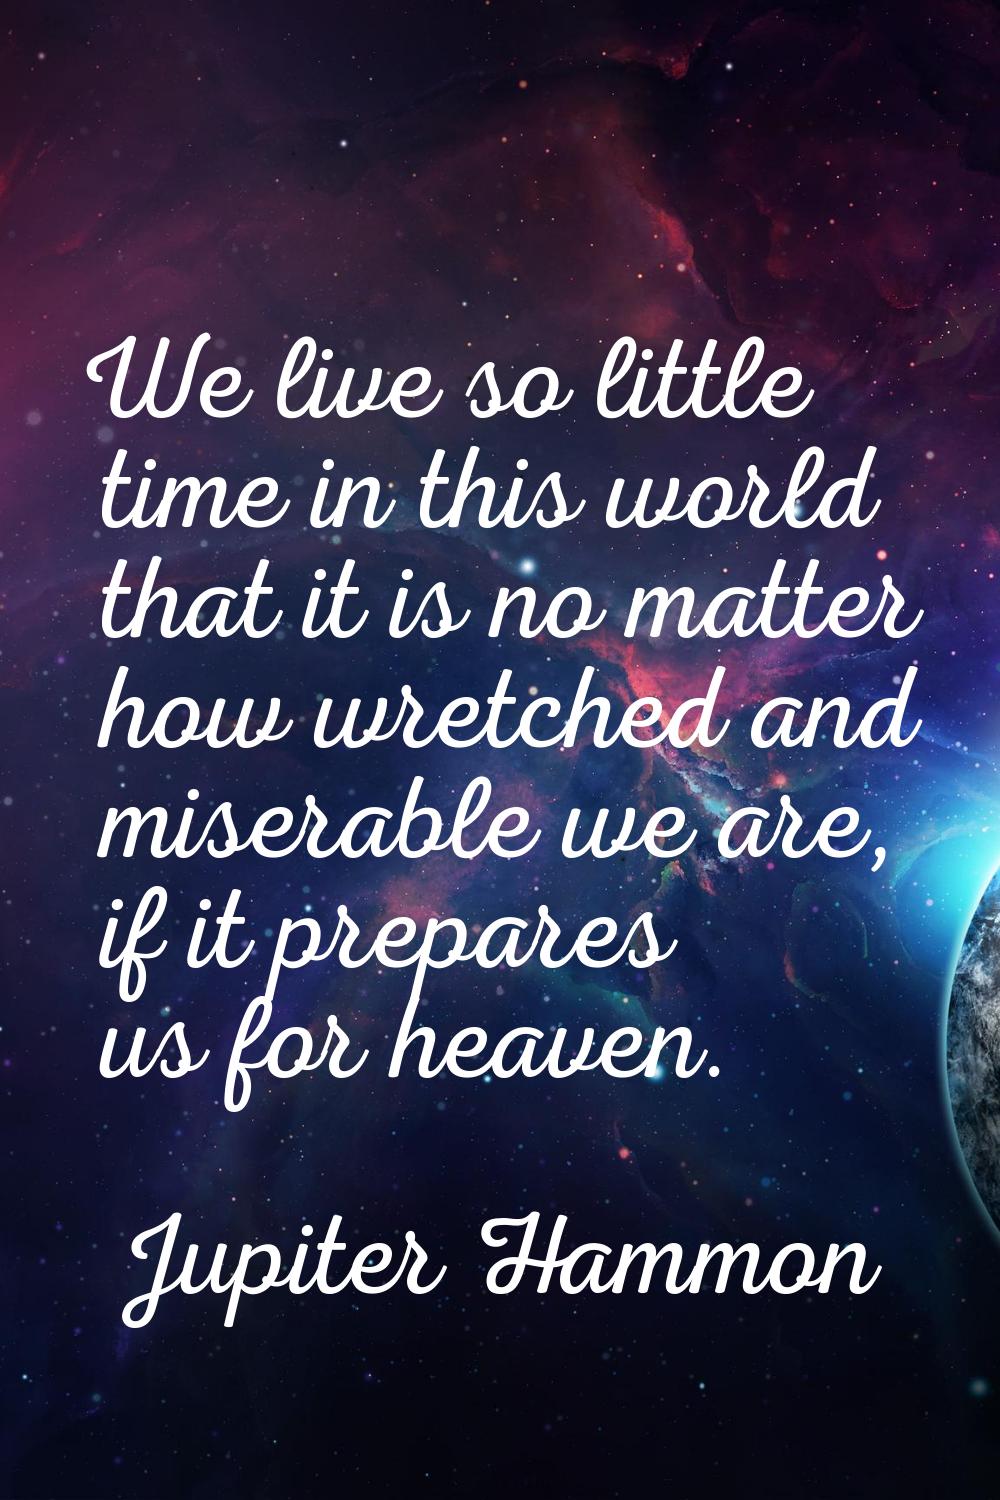 We live so little time in this world that it is no matter how wretched and miserable we are, if it 